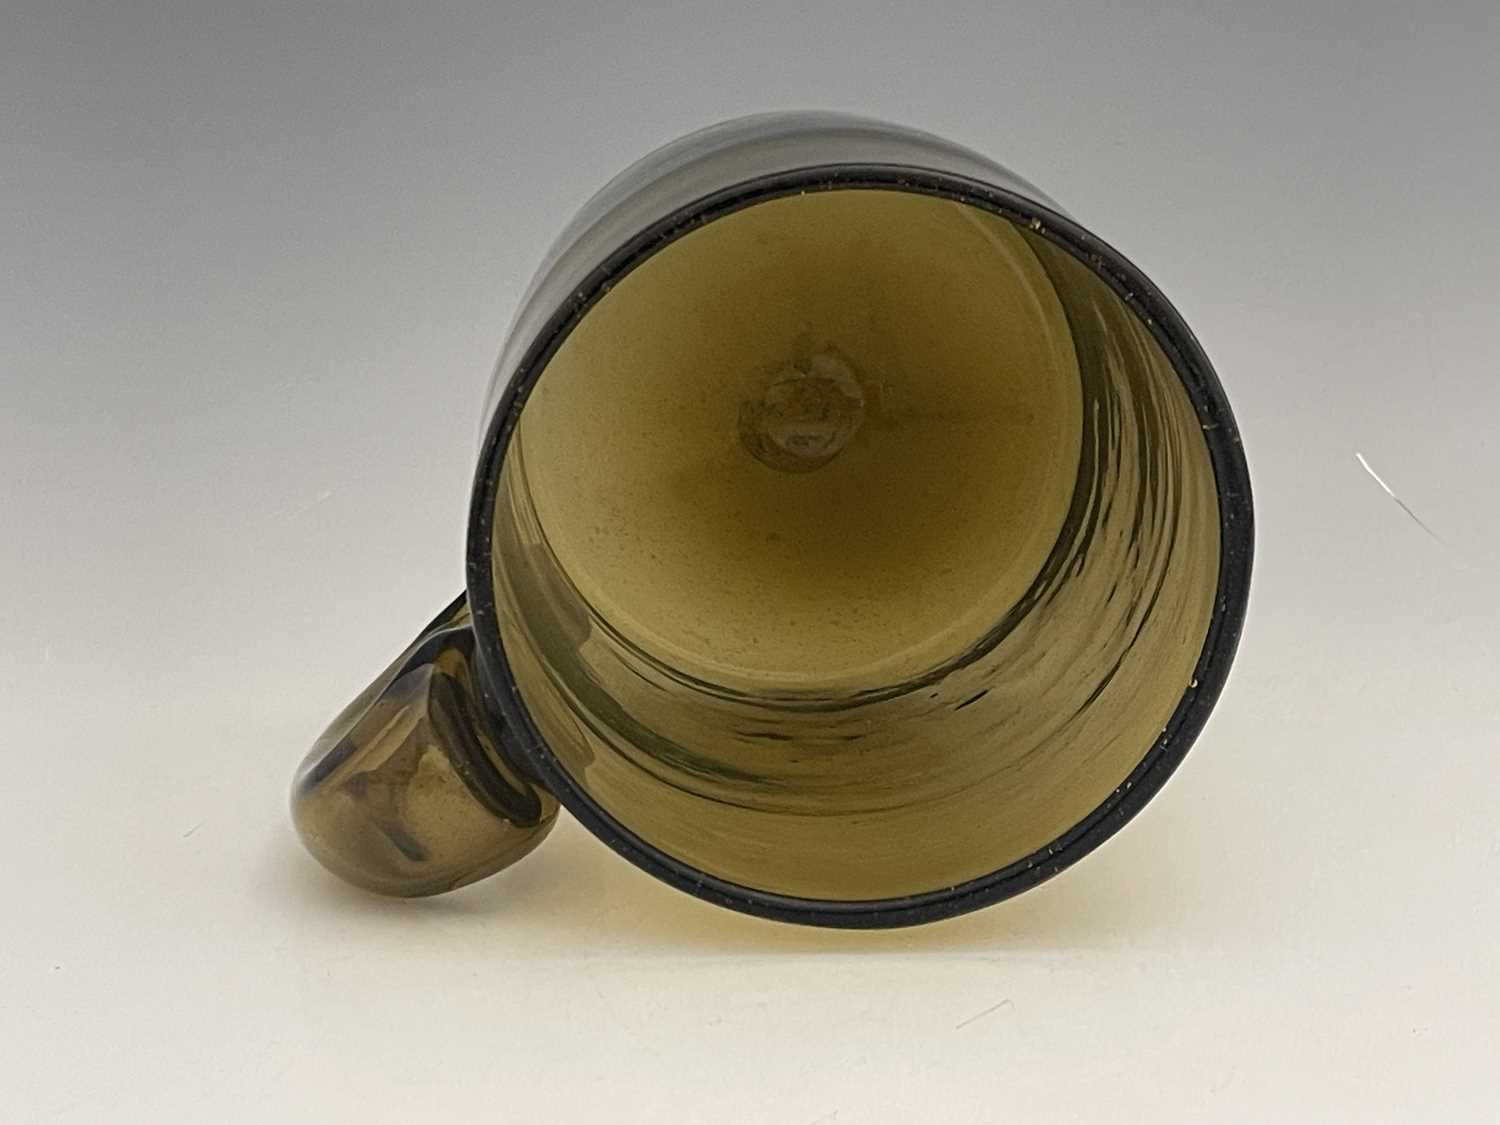 A large novelty glass tankard, 19th century, possibly Scottish, cylindrical form bubbled glass - Image 2 of 3